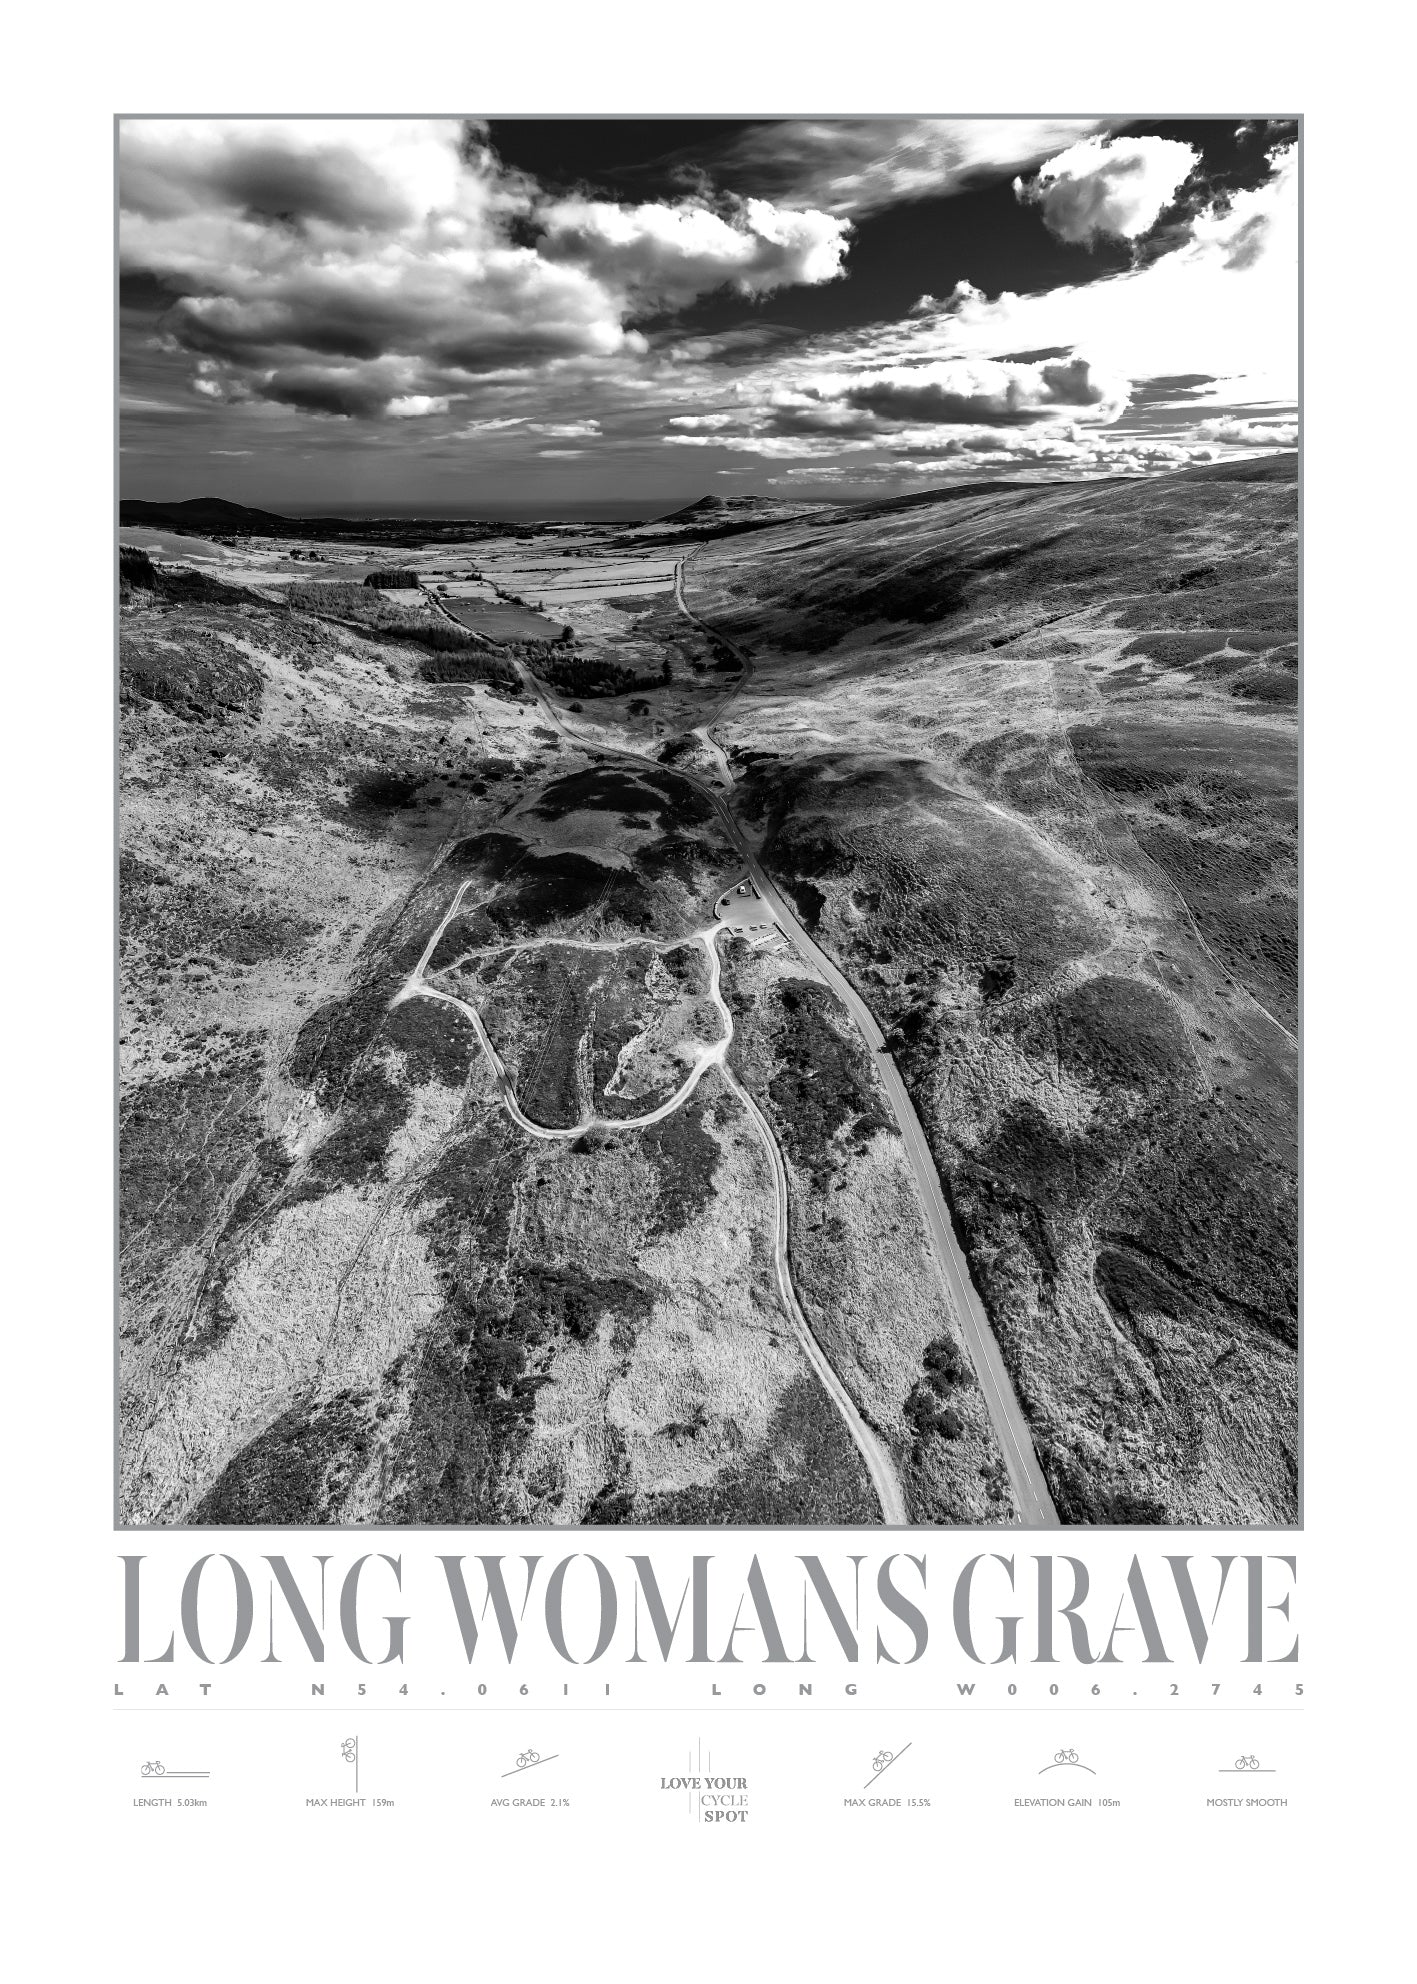 LONG WOMANS GRAVE CO LOUTH